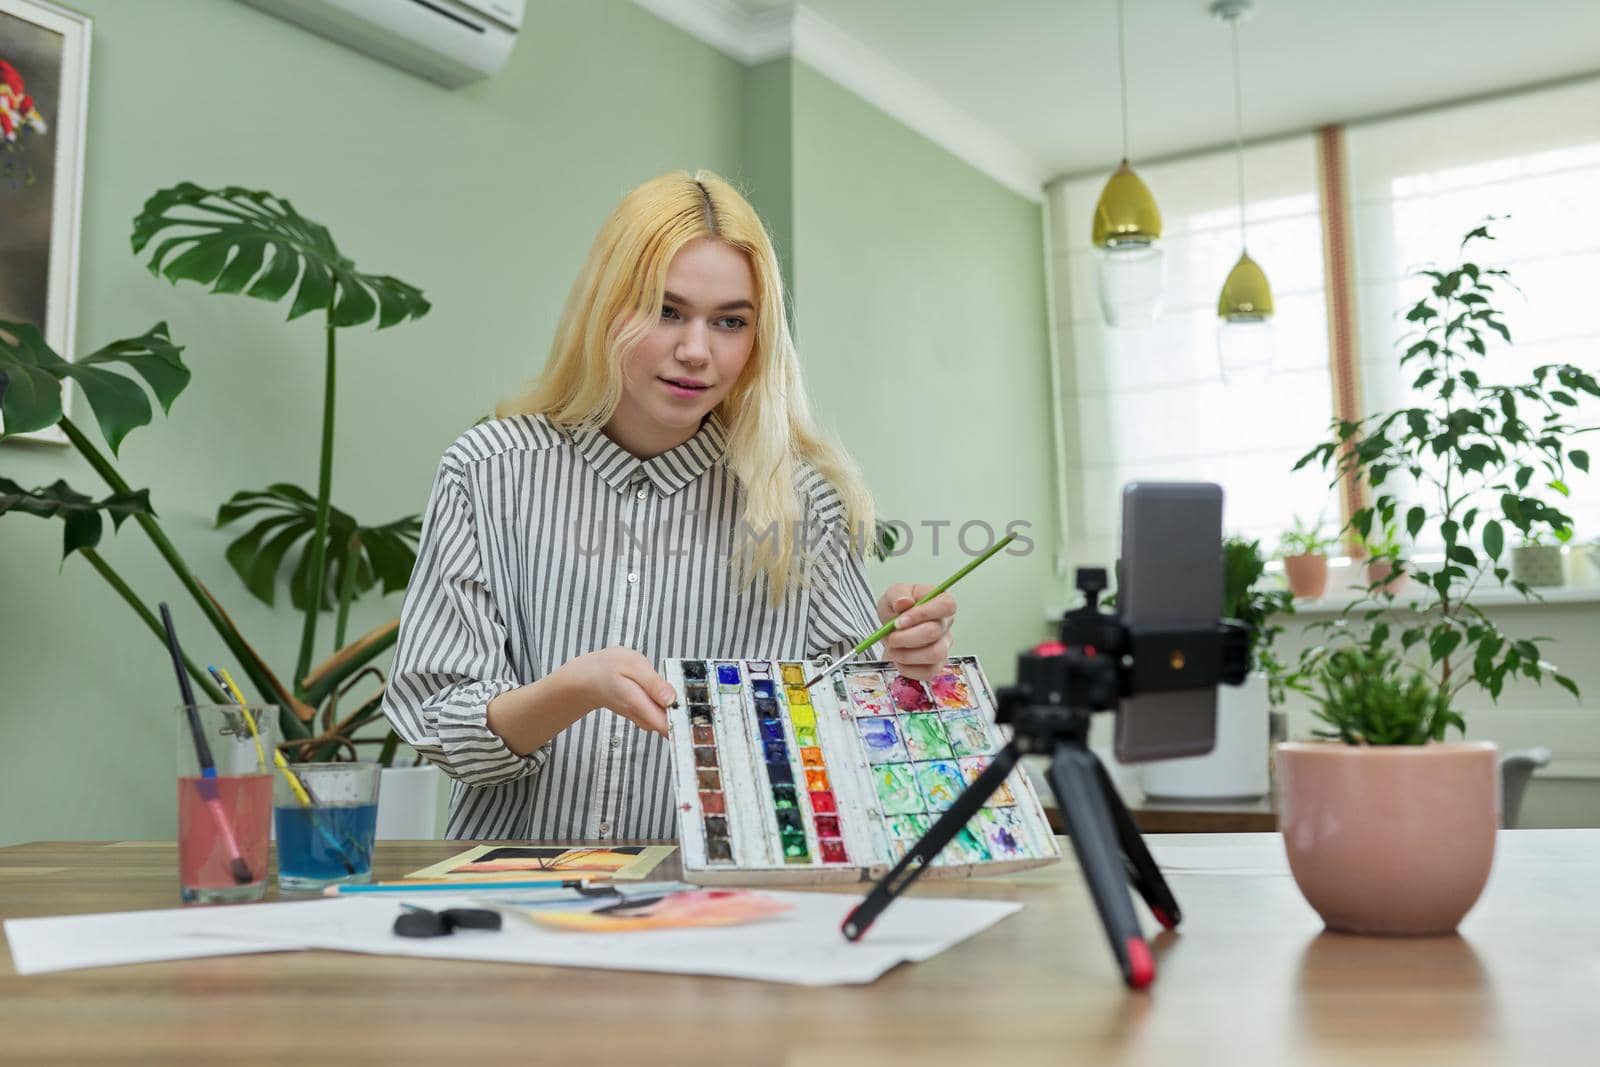 Teenage girl recording video drawing lesson using smartphone on tripod, showing watercolor paints. Hobby, leisure, technology, online learning, creativity, teenagers concept